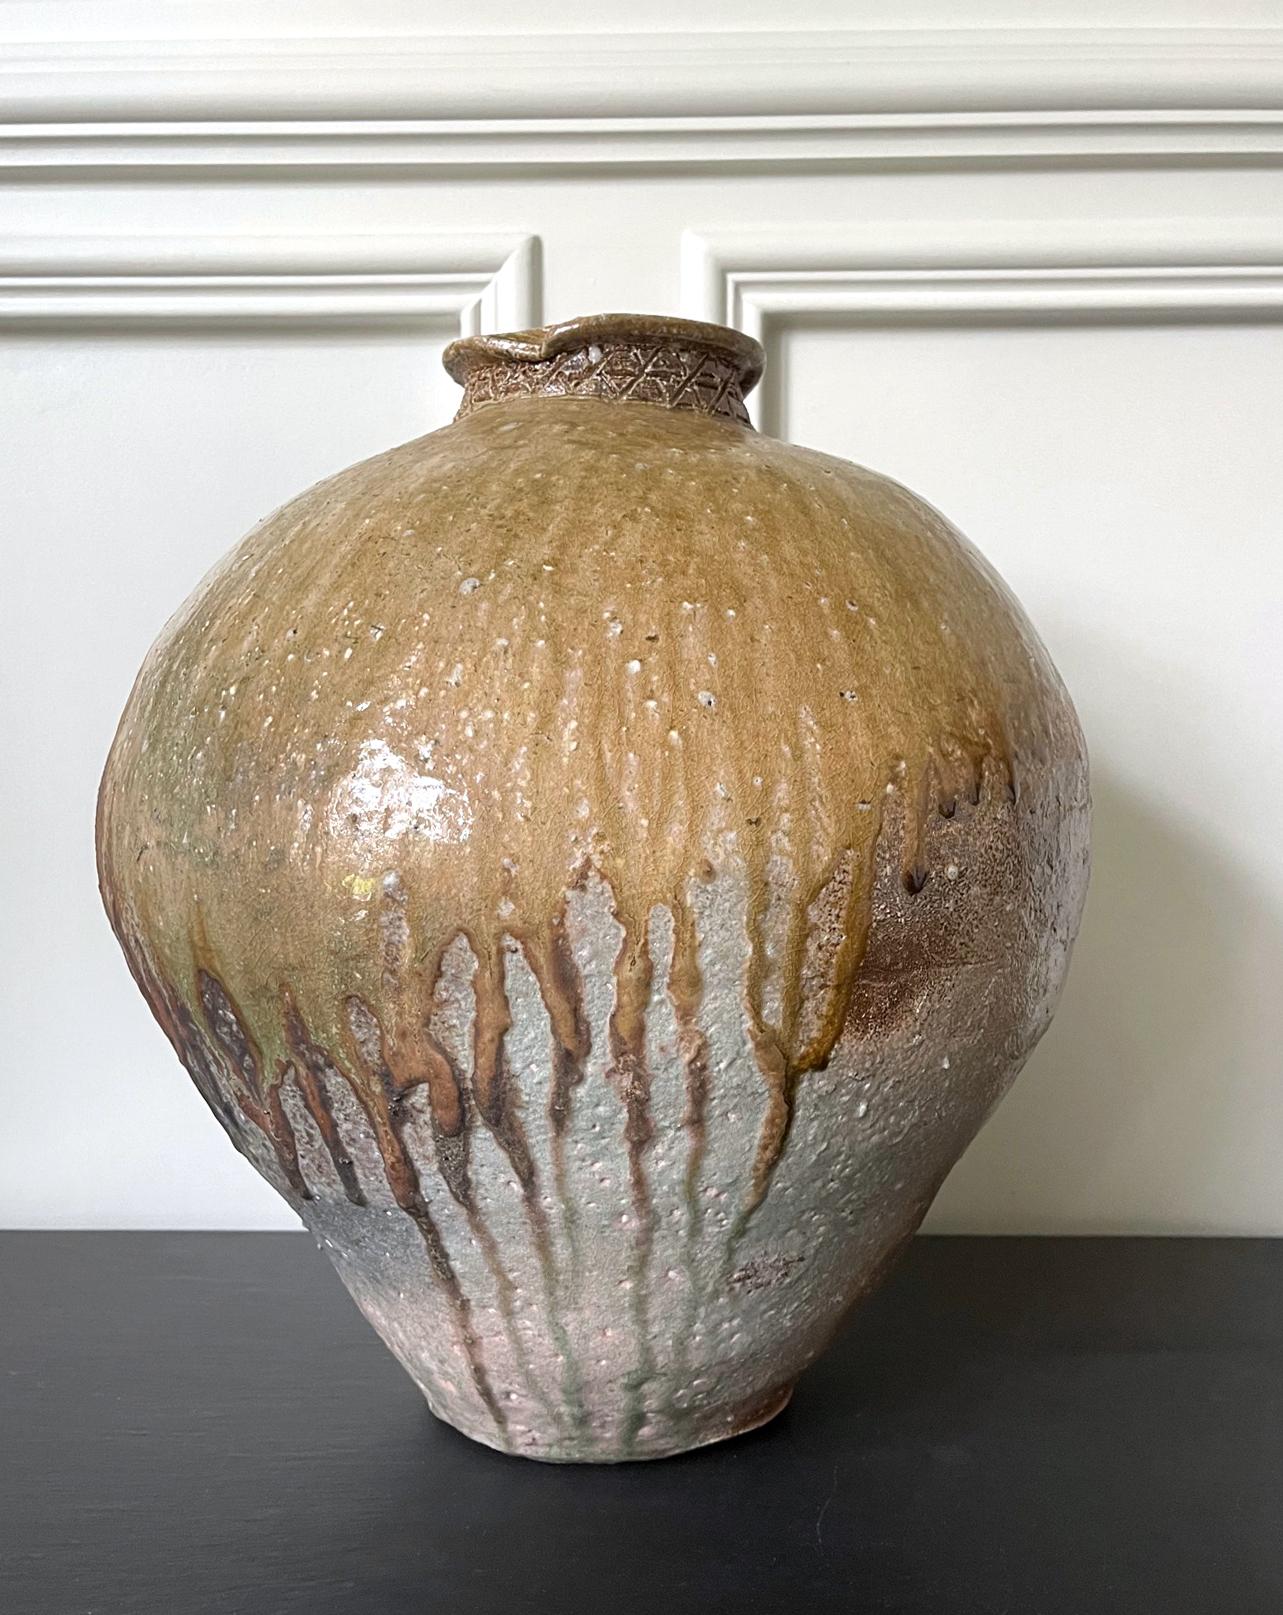 An impressive Shigaraki Tsubo (jar normally for storage) in an archaic form with a bulbous and robust body that opens with a small lipped mouth. Heavily potted with substantial size and volume, this tsubo showcases an exquisite surface with dripping